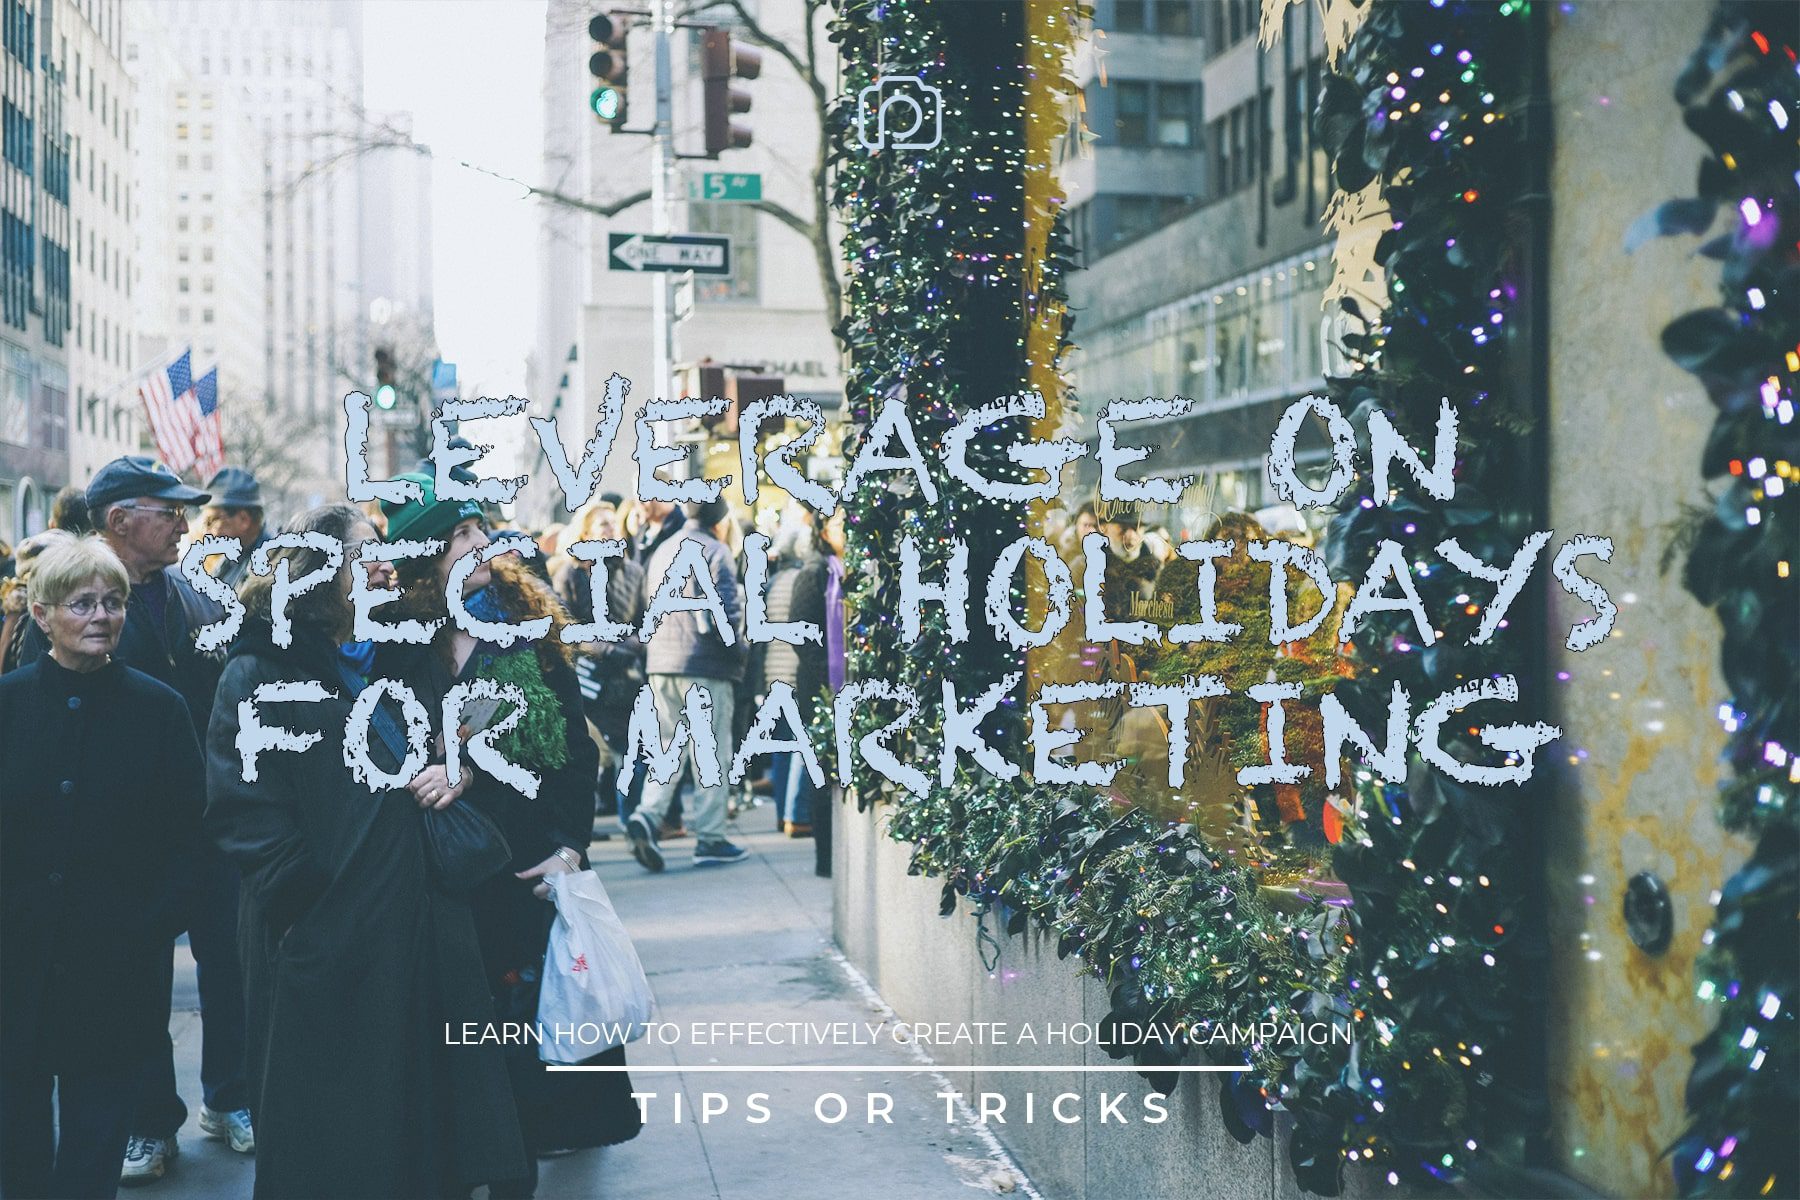 How brands leverage on special holidays for marketing